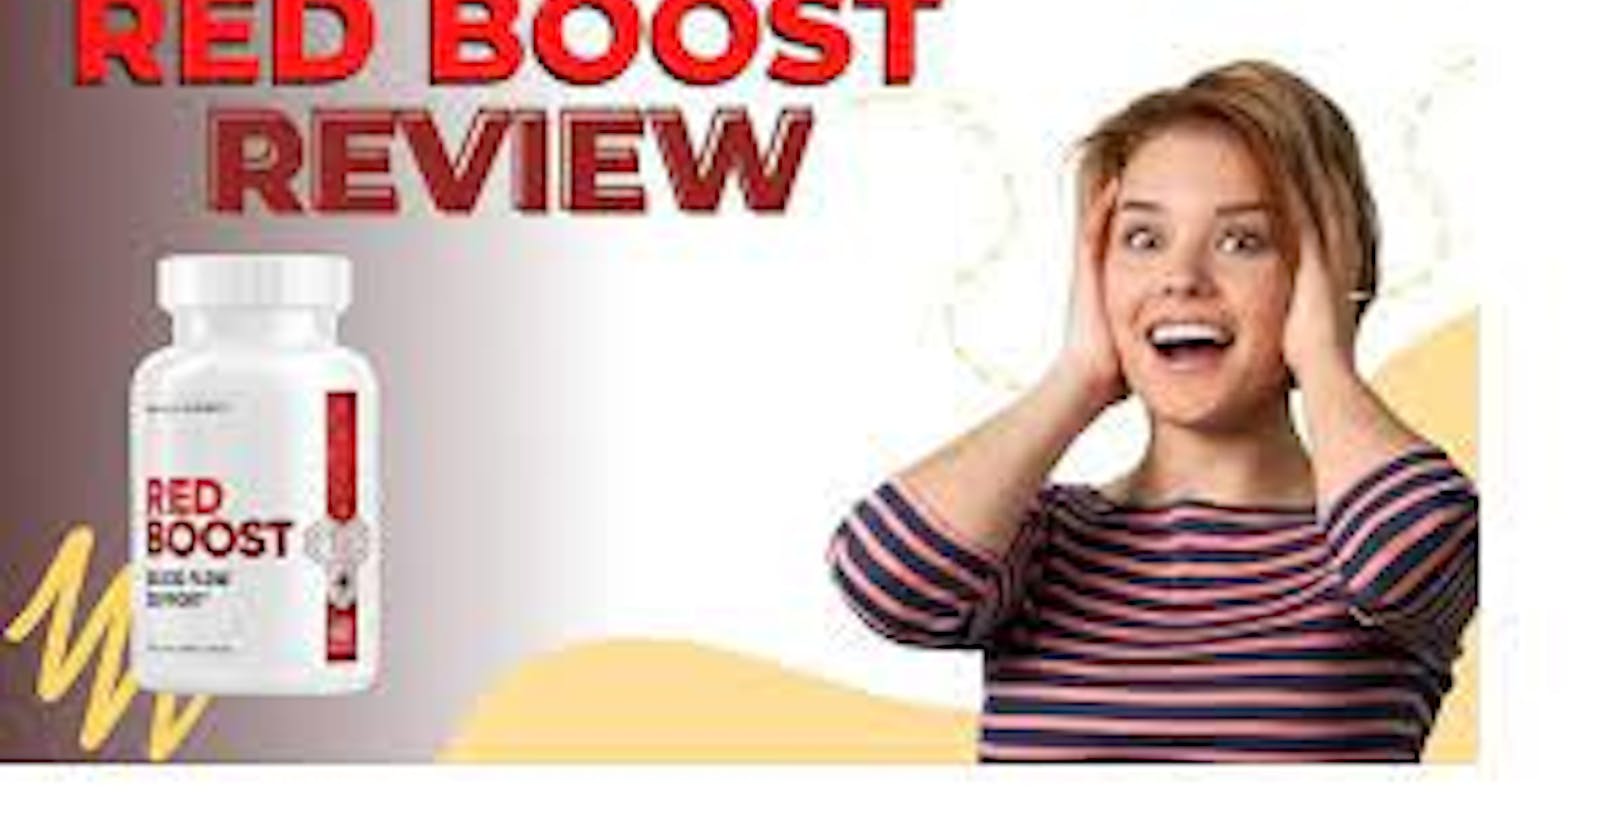 Red Boost Reviews - No Any Hidden Side Effects! Dangers Report Expose?